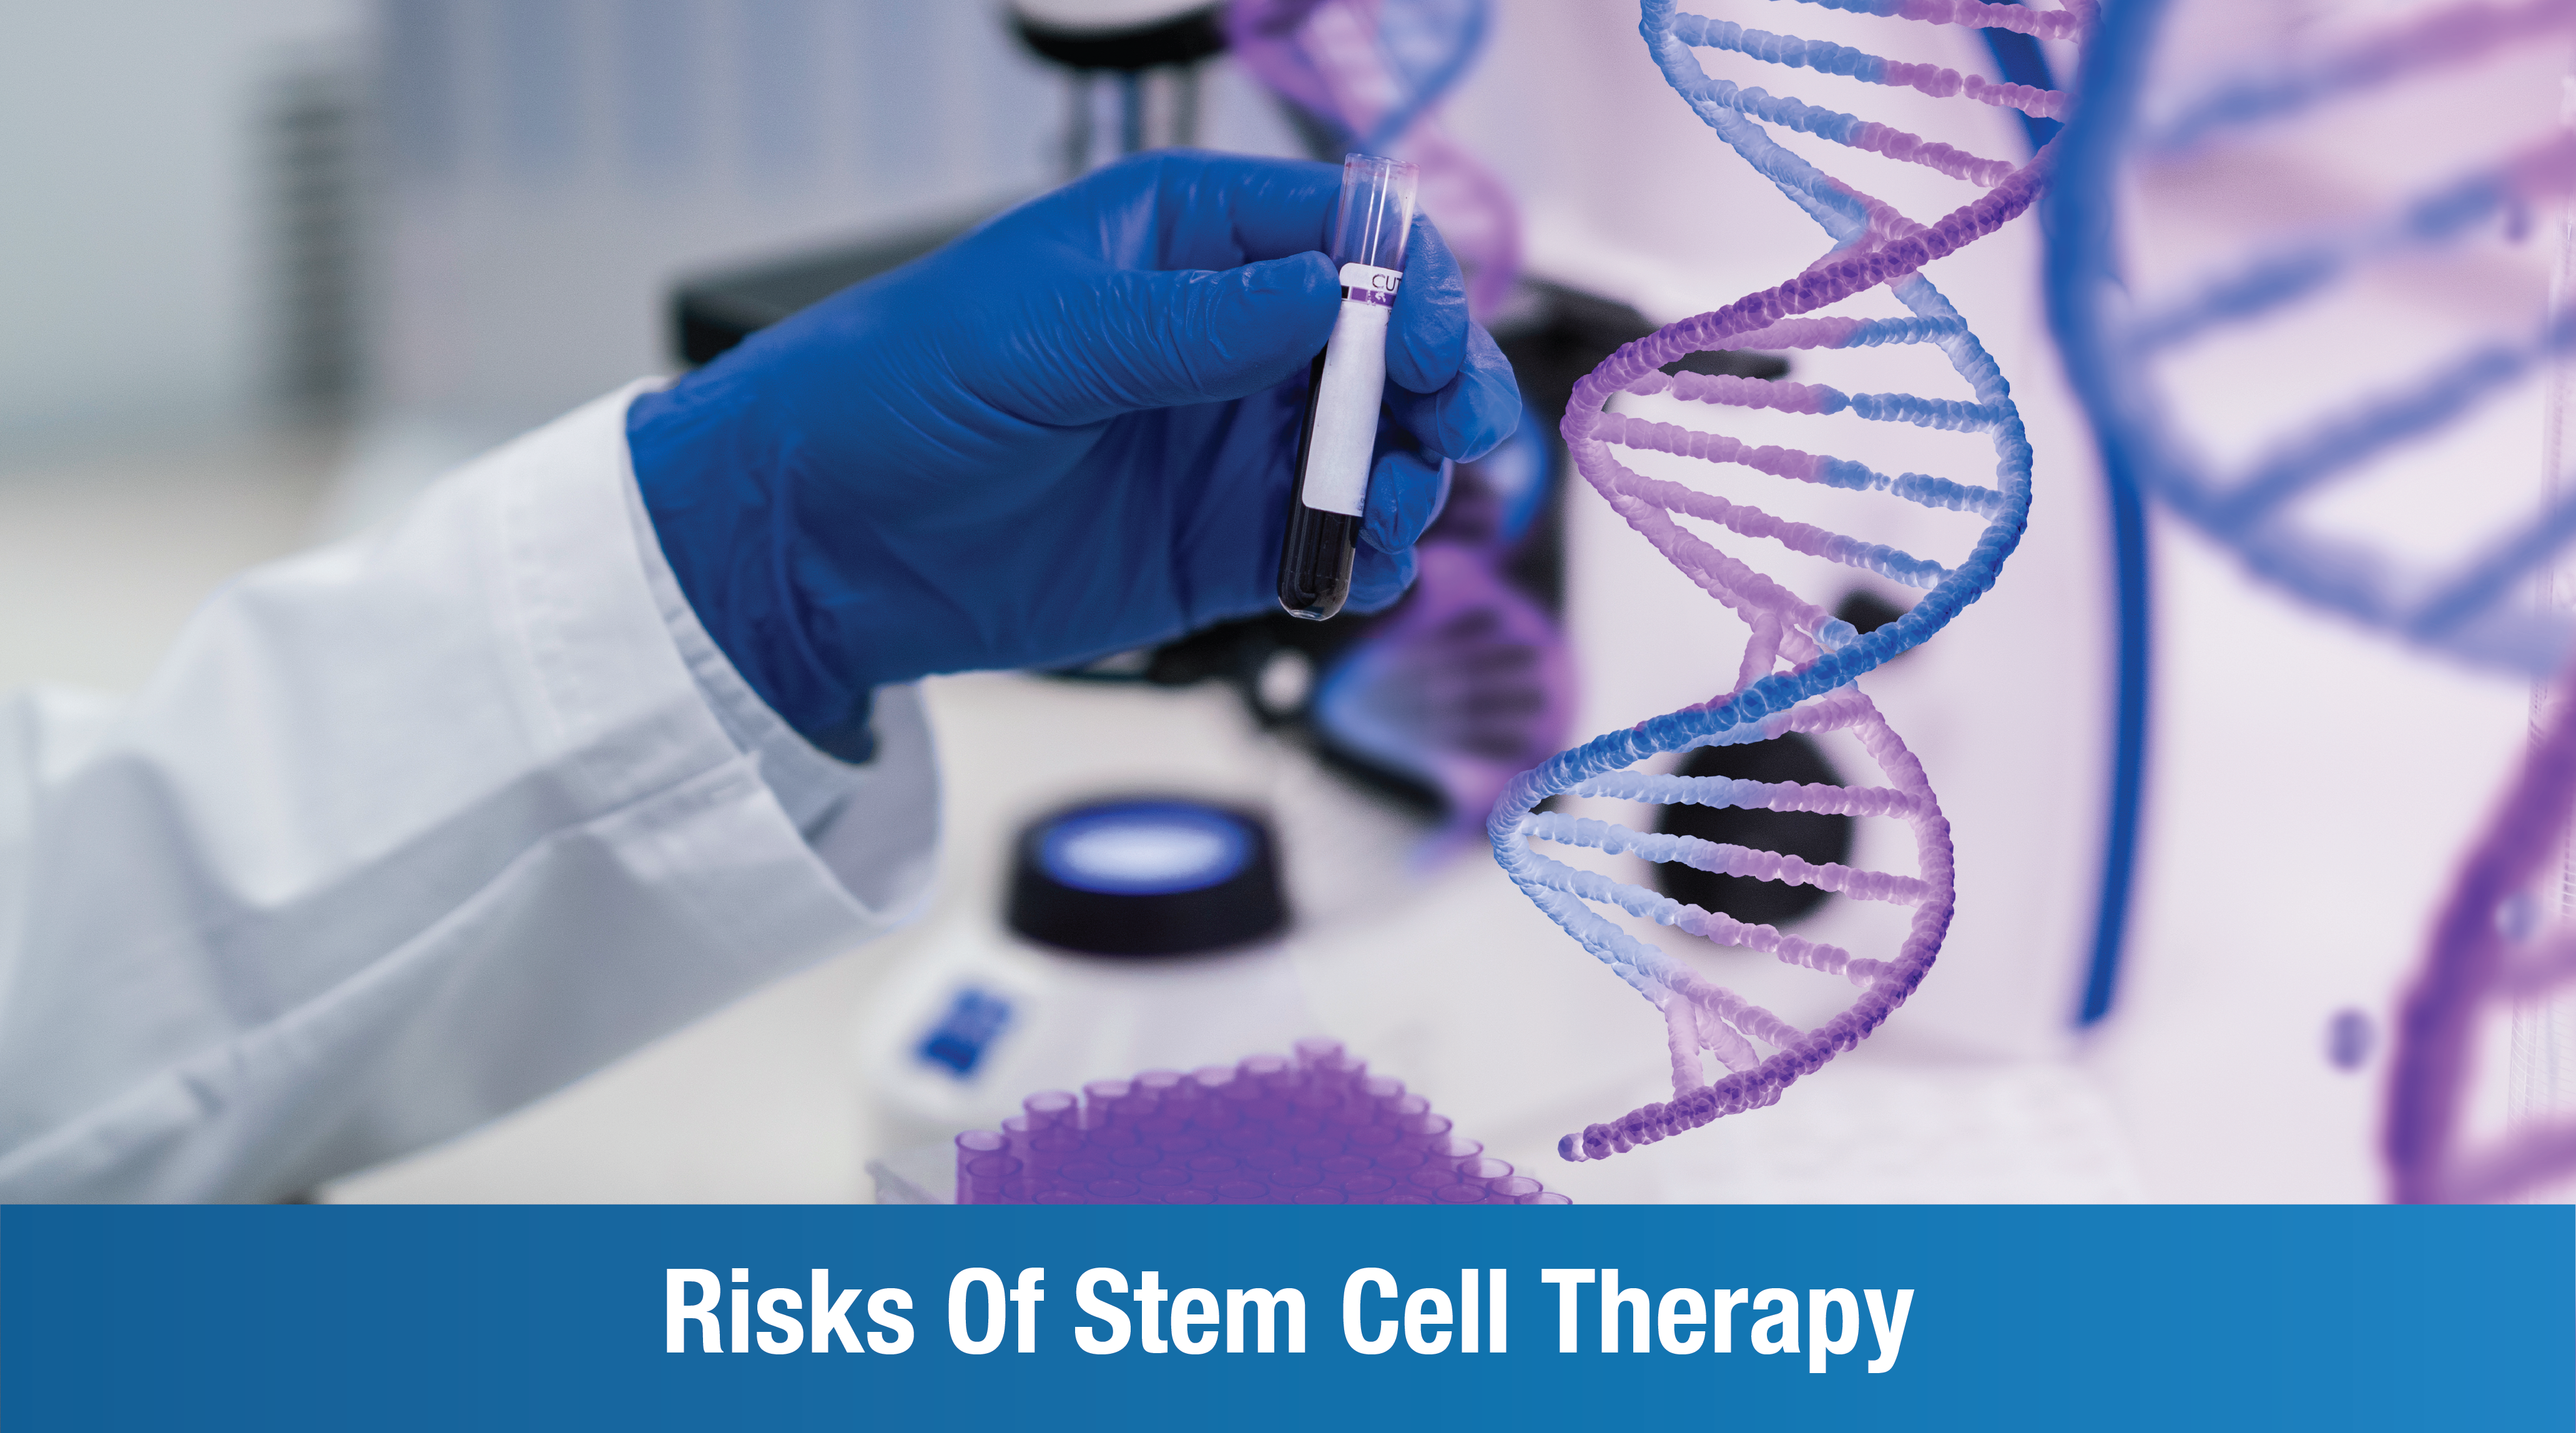 Risks of Stem Cell Therapy